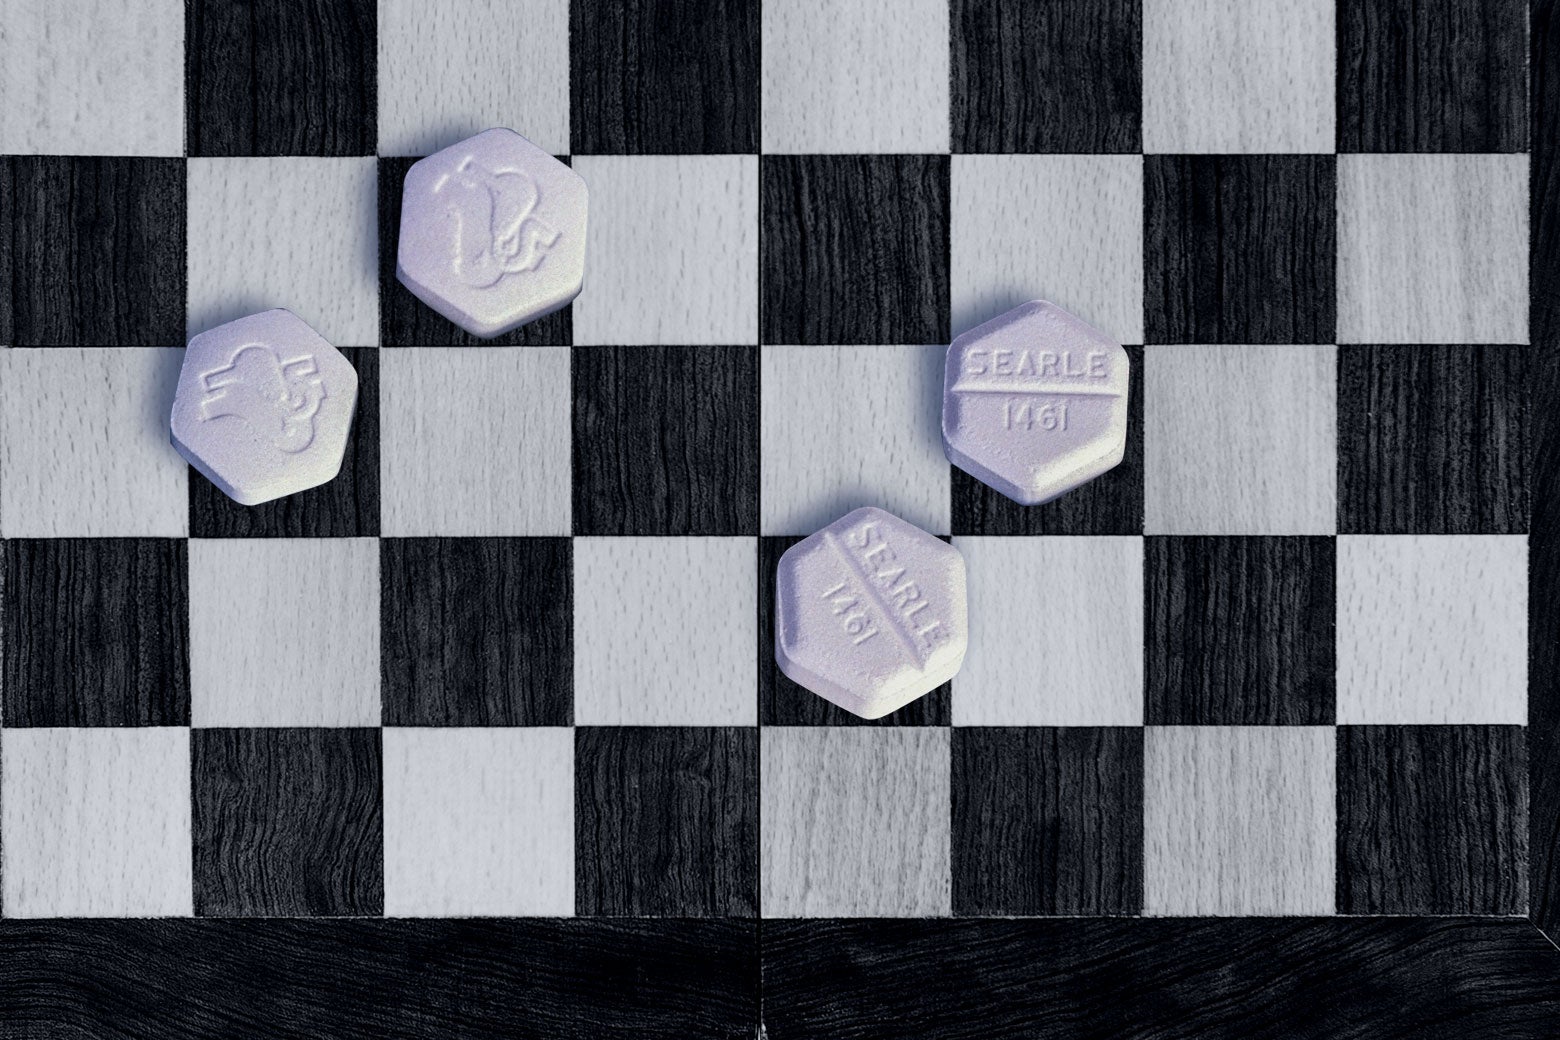 A chess board with pills instead of chess pieces.